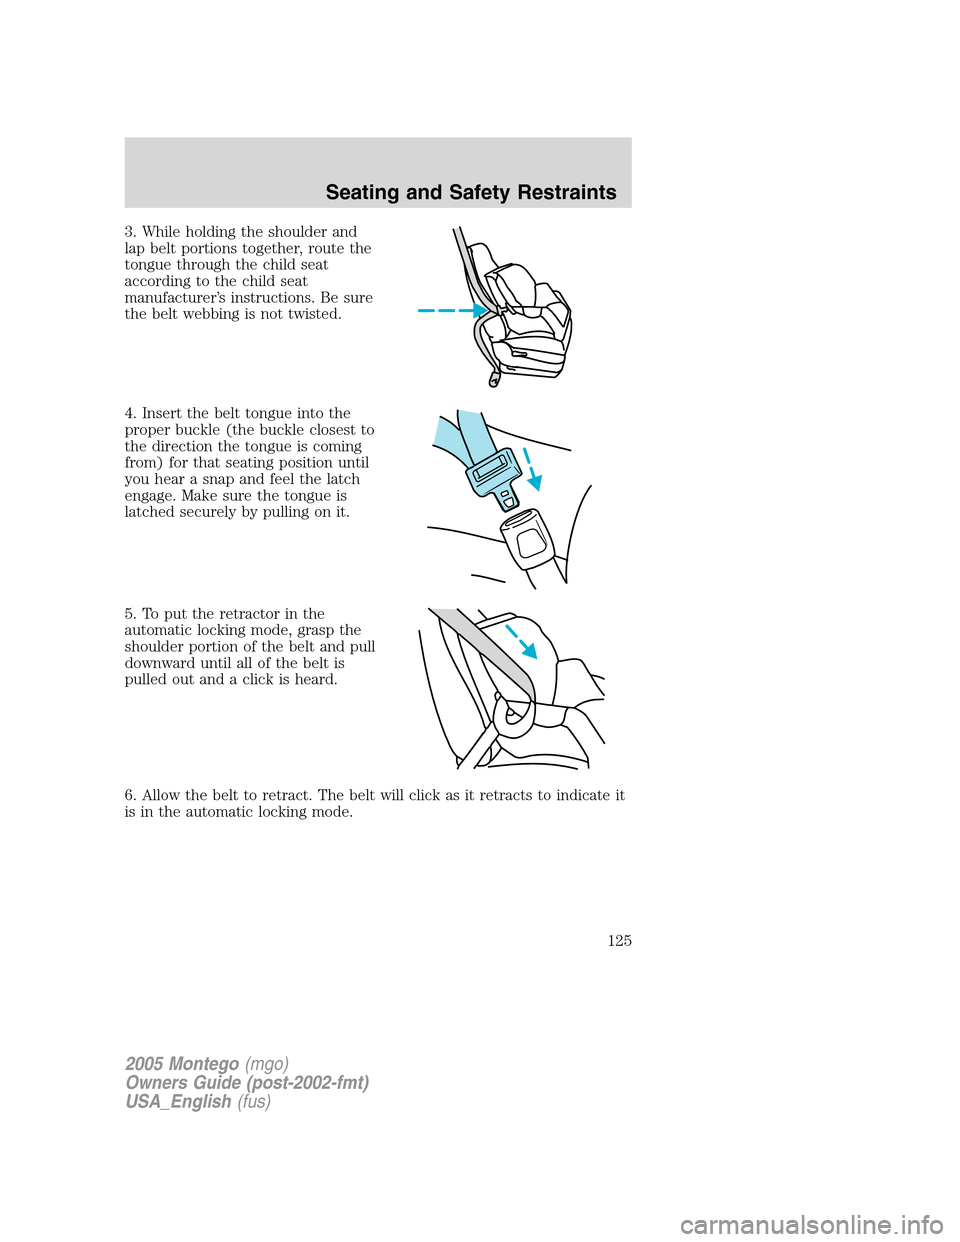 Mercury Montego 2005  Owners Manuals 3. While holding the shoulder and
lap belt portions together, route the
tongue through the child seat
according to the child seat
manufacturer’s instructions. Be sure
the belt webbing is not twisted